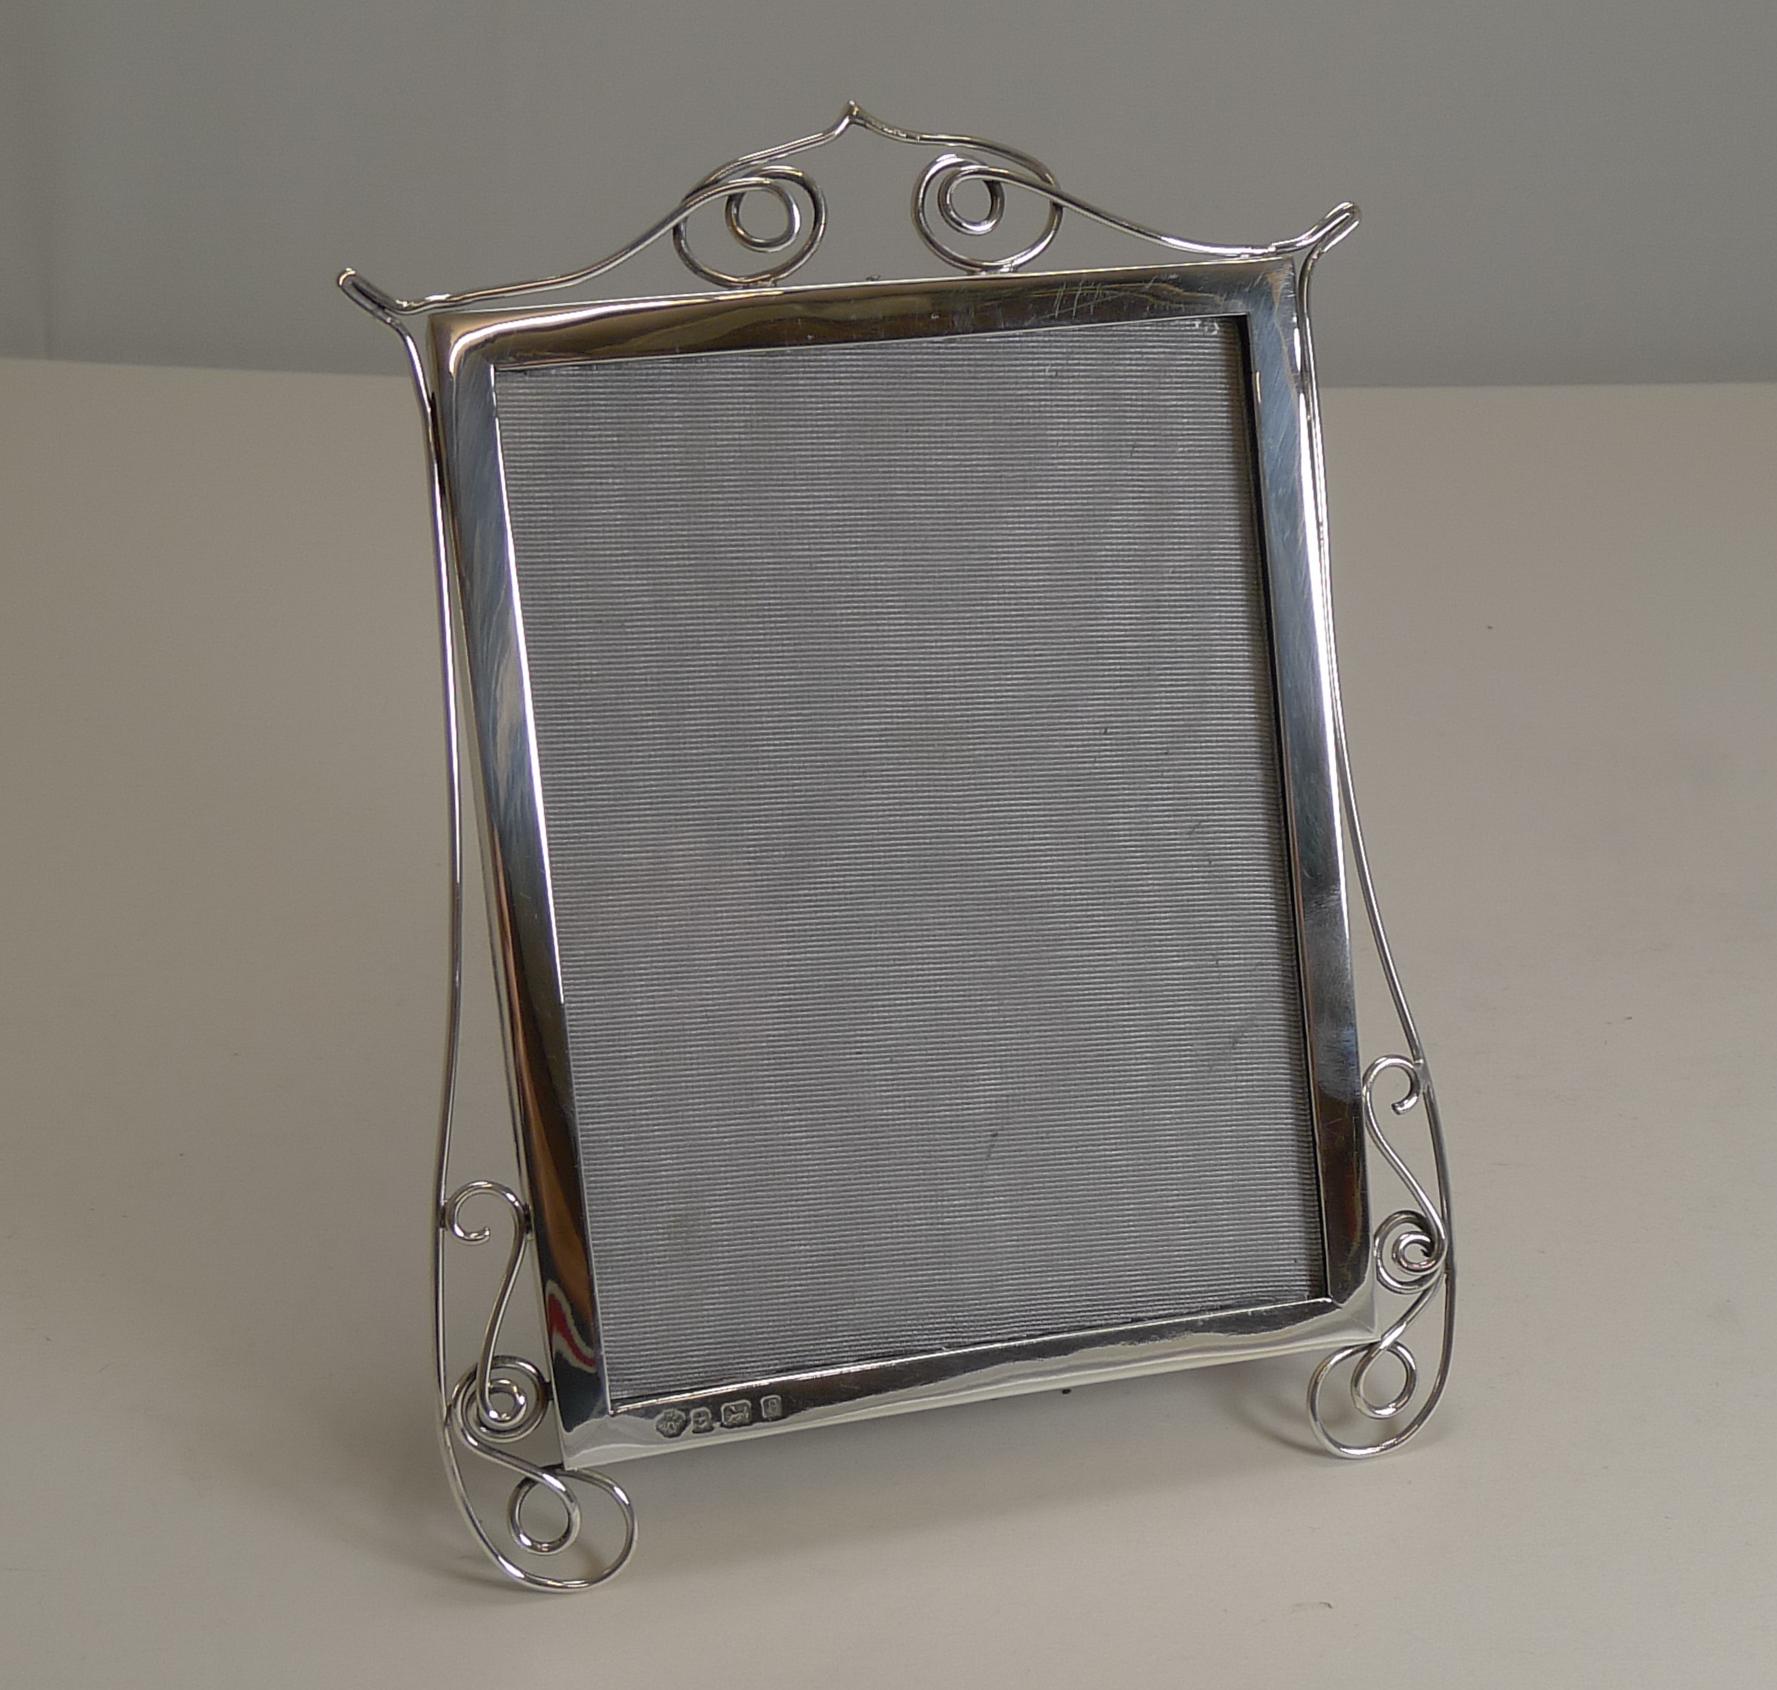 A wonderfully decorative and unusual Edwardian sterling silver frame by the top-notch silversmith, William Hutton and Sons.

The simple frame is decorated with sterling silver wire-work, creating two legs.

The back has a leather backing